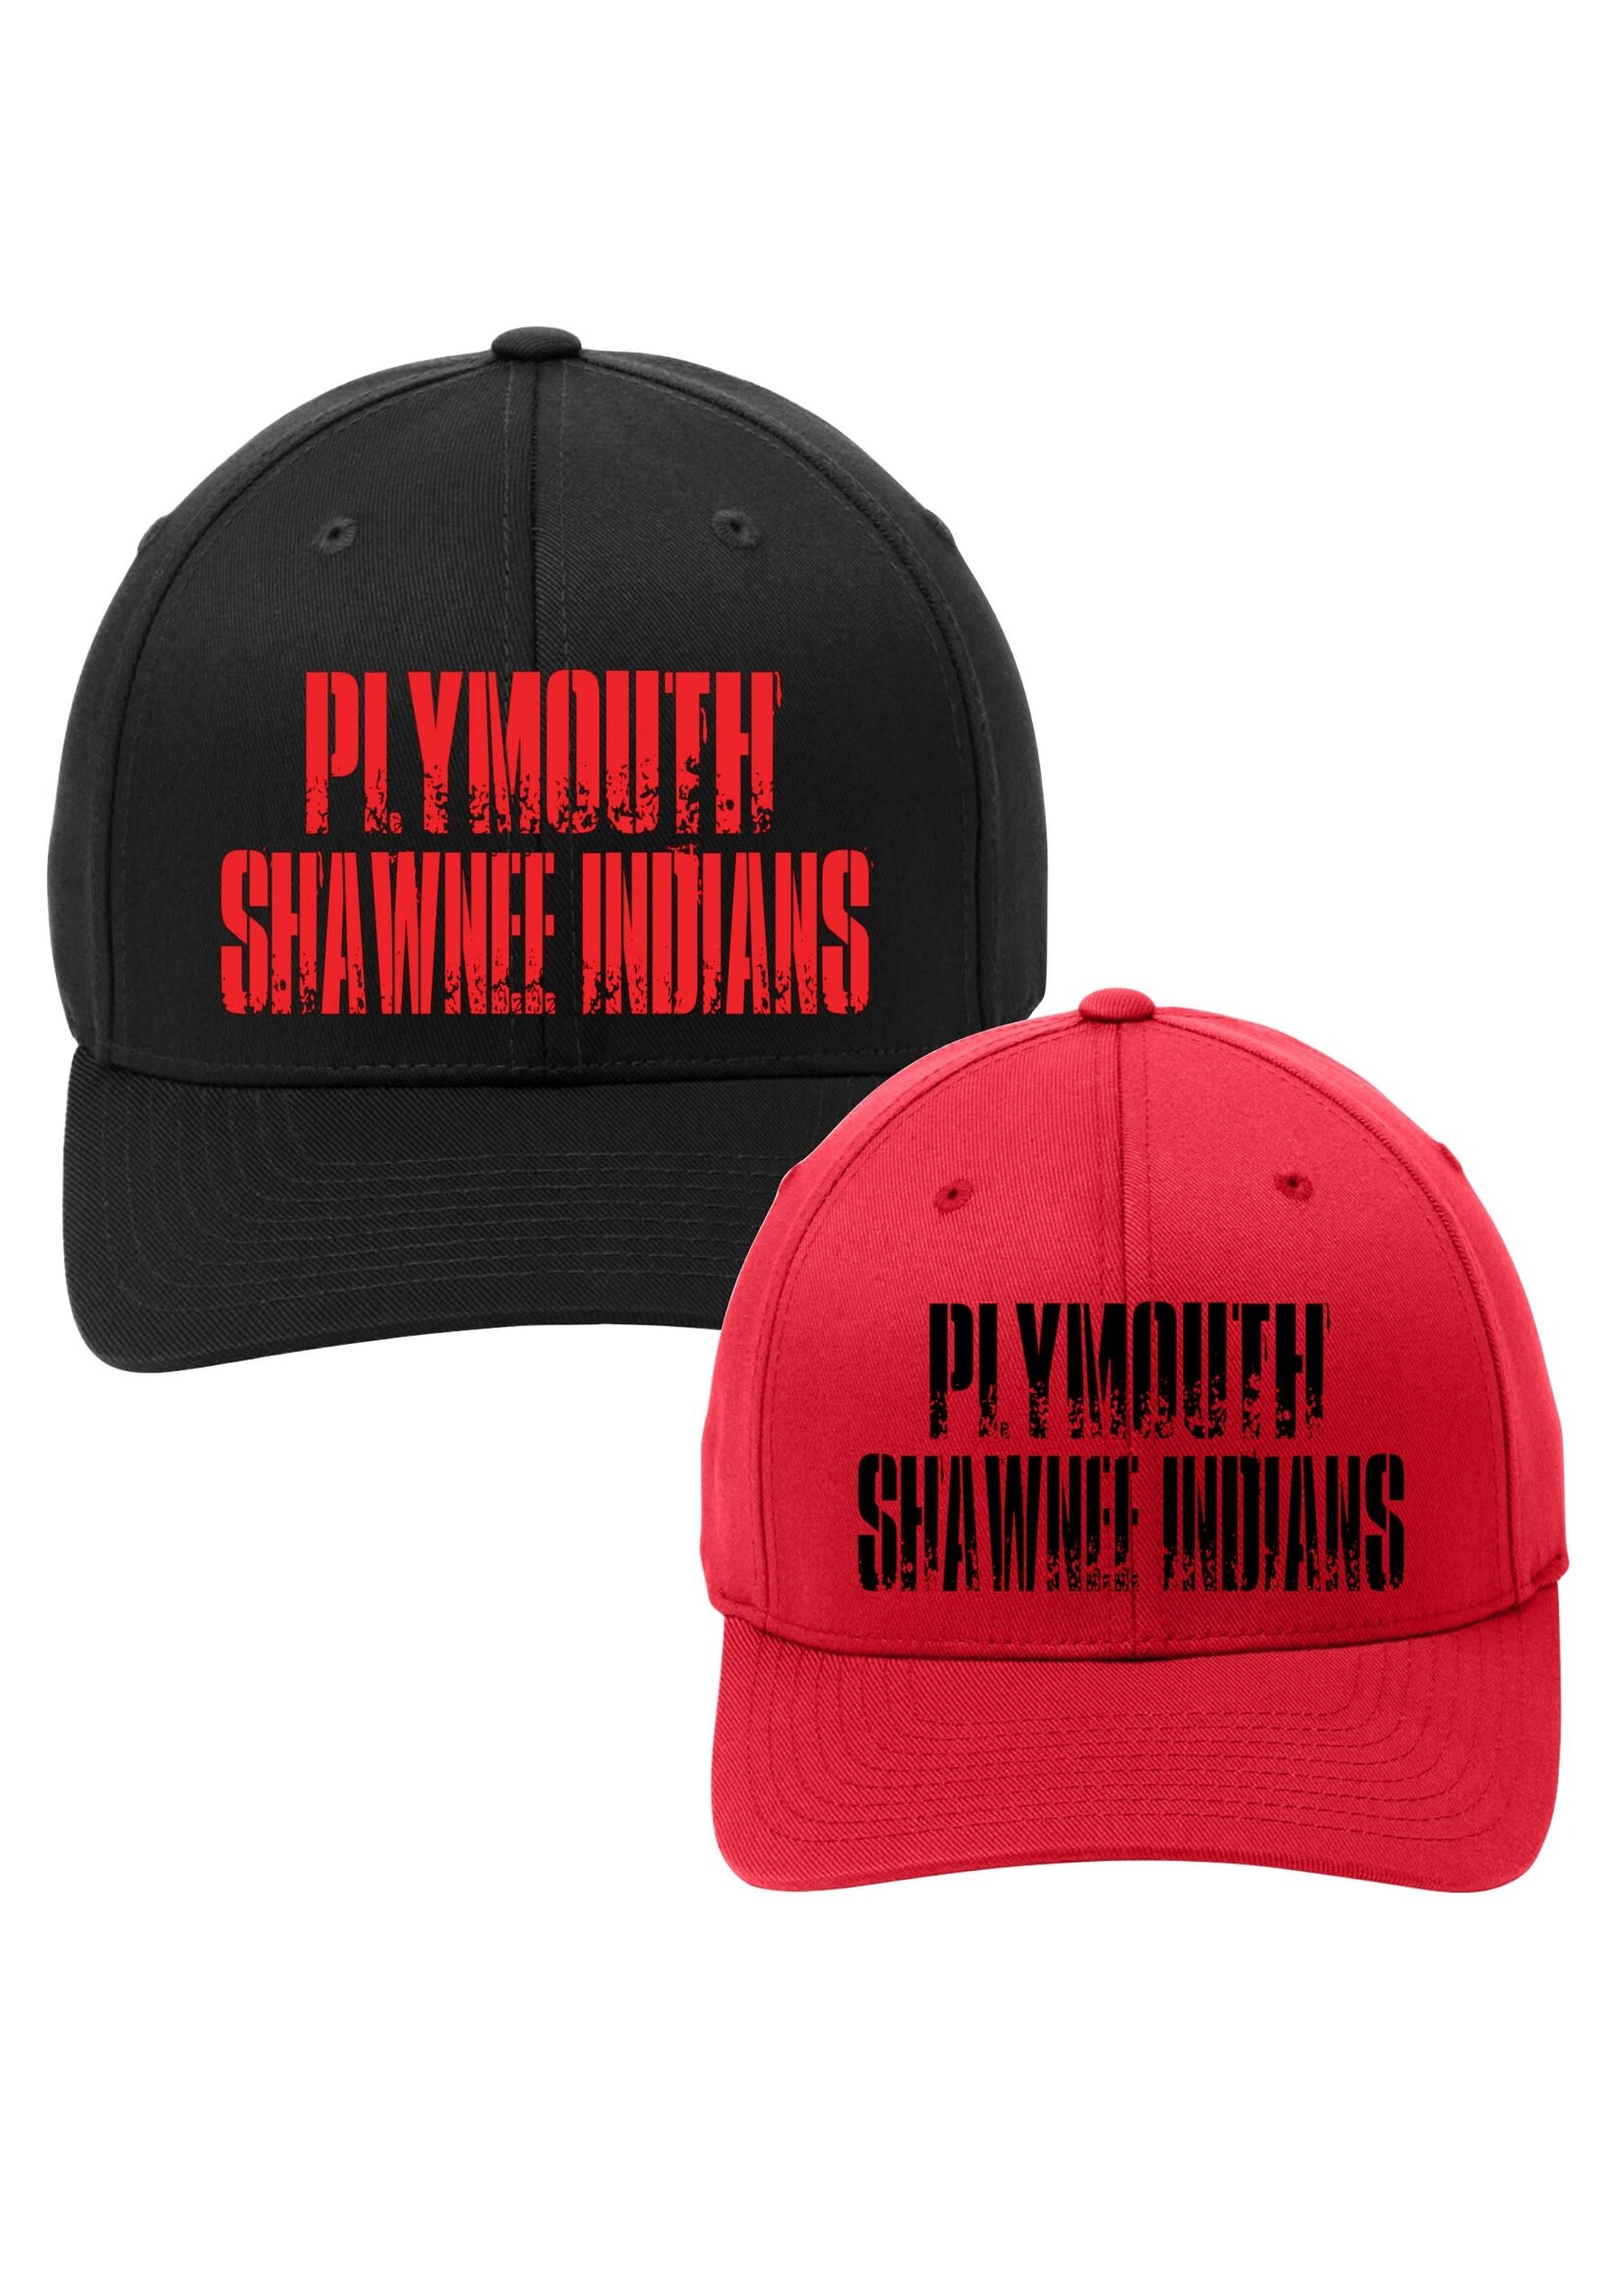 Plymouth Shawnee Indians Fitted Cap